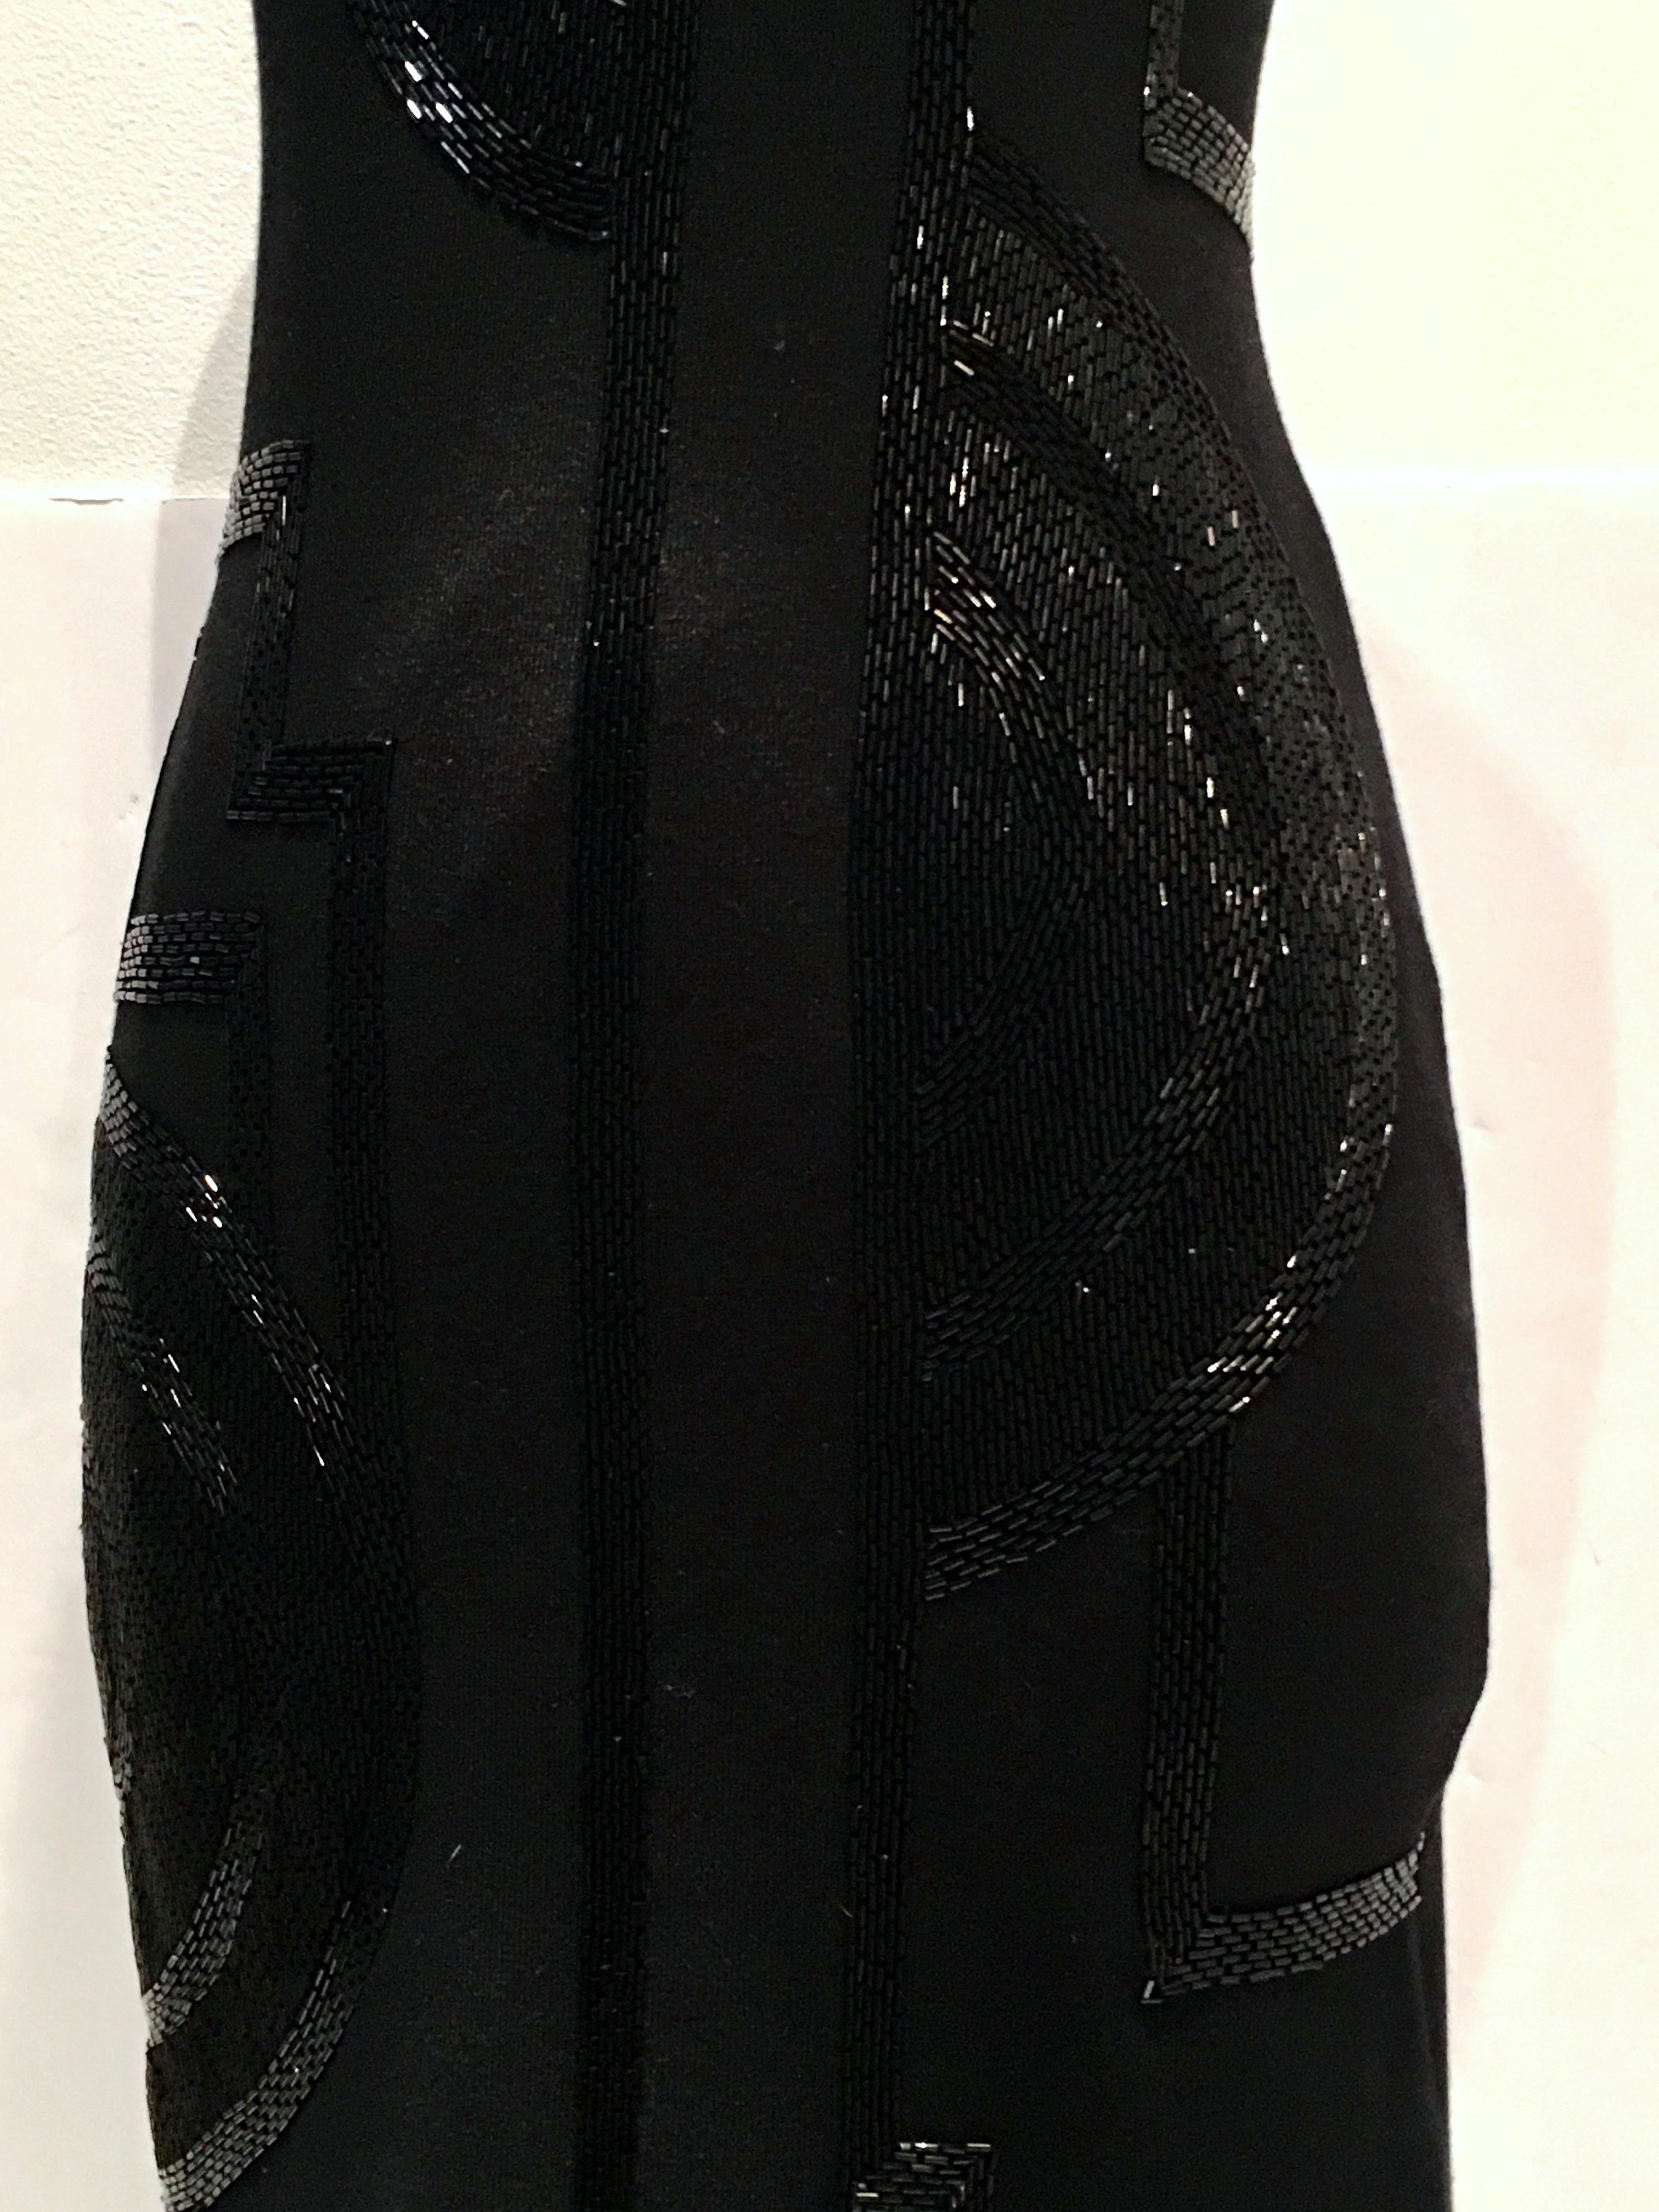 Contemporary Silk Knit Beaded Strapless Cocktail Dress By, Ralph Lauren NWT For Sale 4